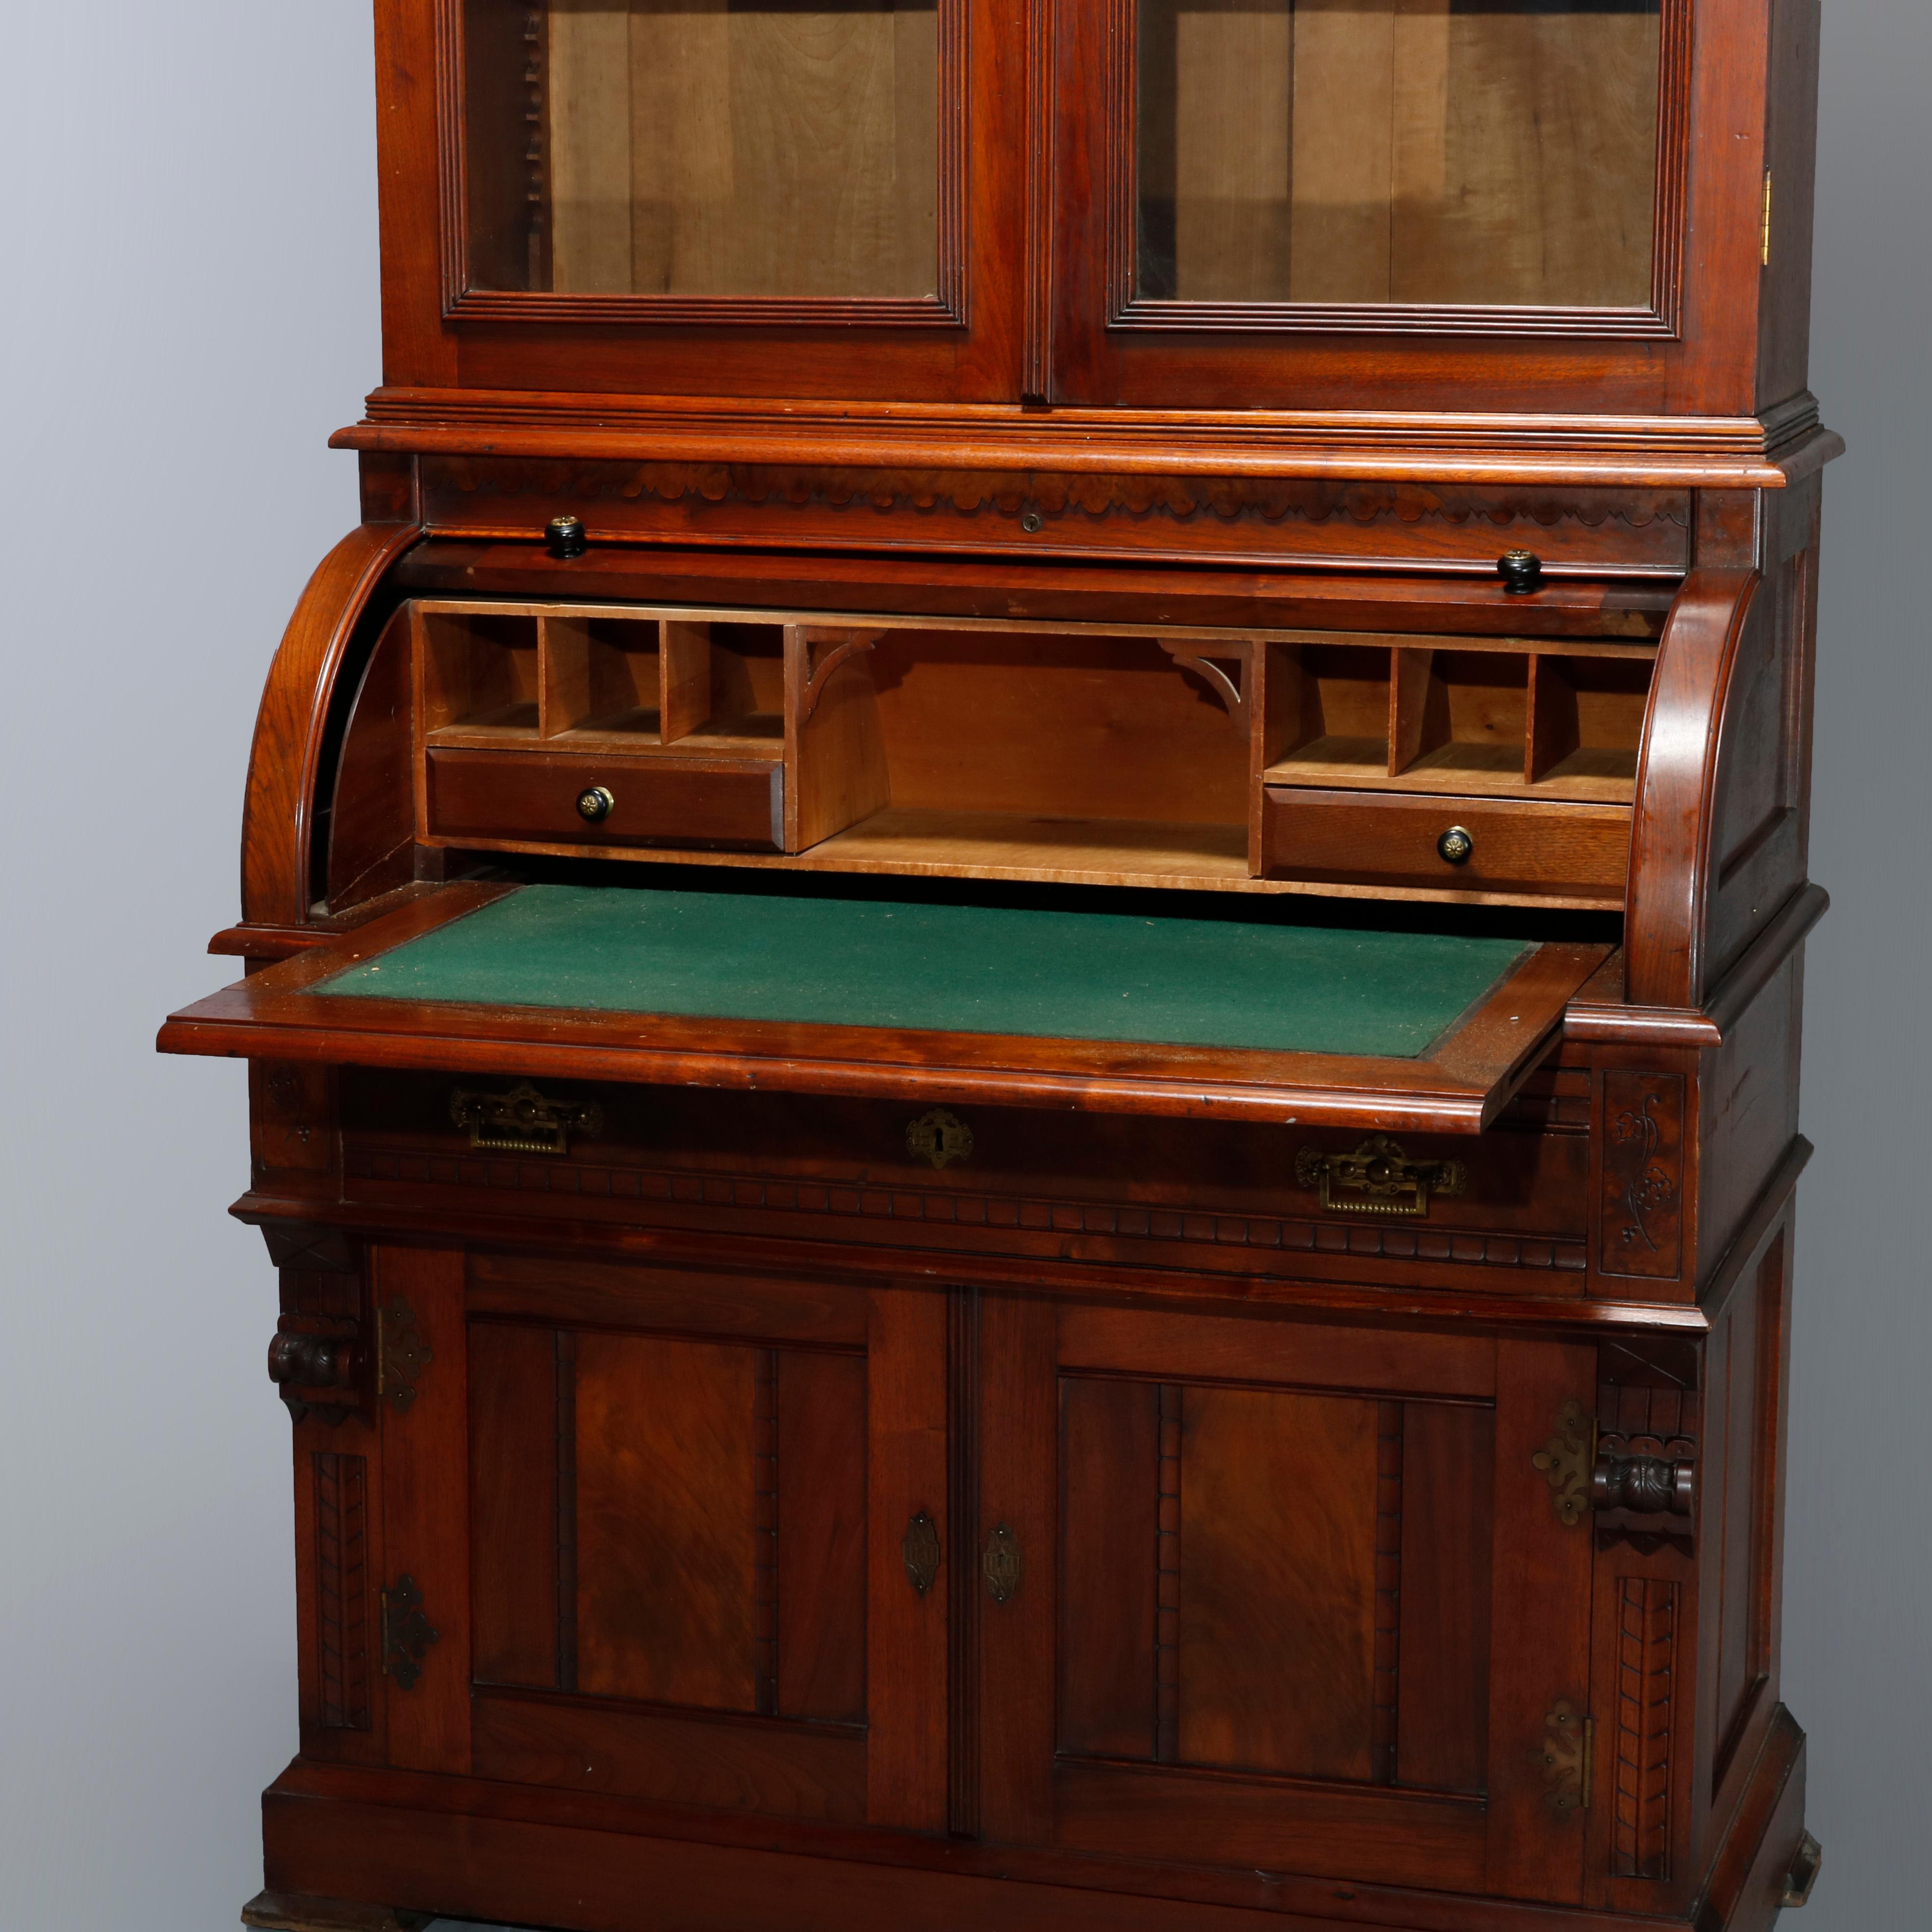 An antique Eastlake secretary offers walnut and burl construction with upper having double glass doors with arched filigree corbels and opening to shelved interior; lower with barrel roll desk with pull-out felted writing surface over a single long